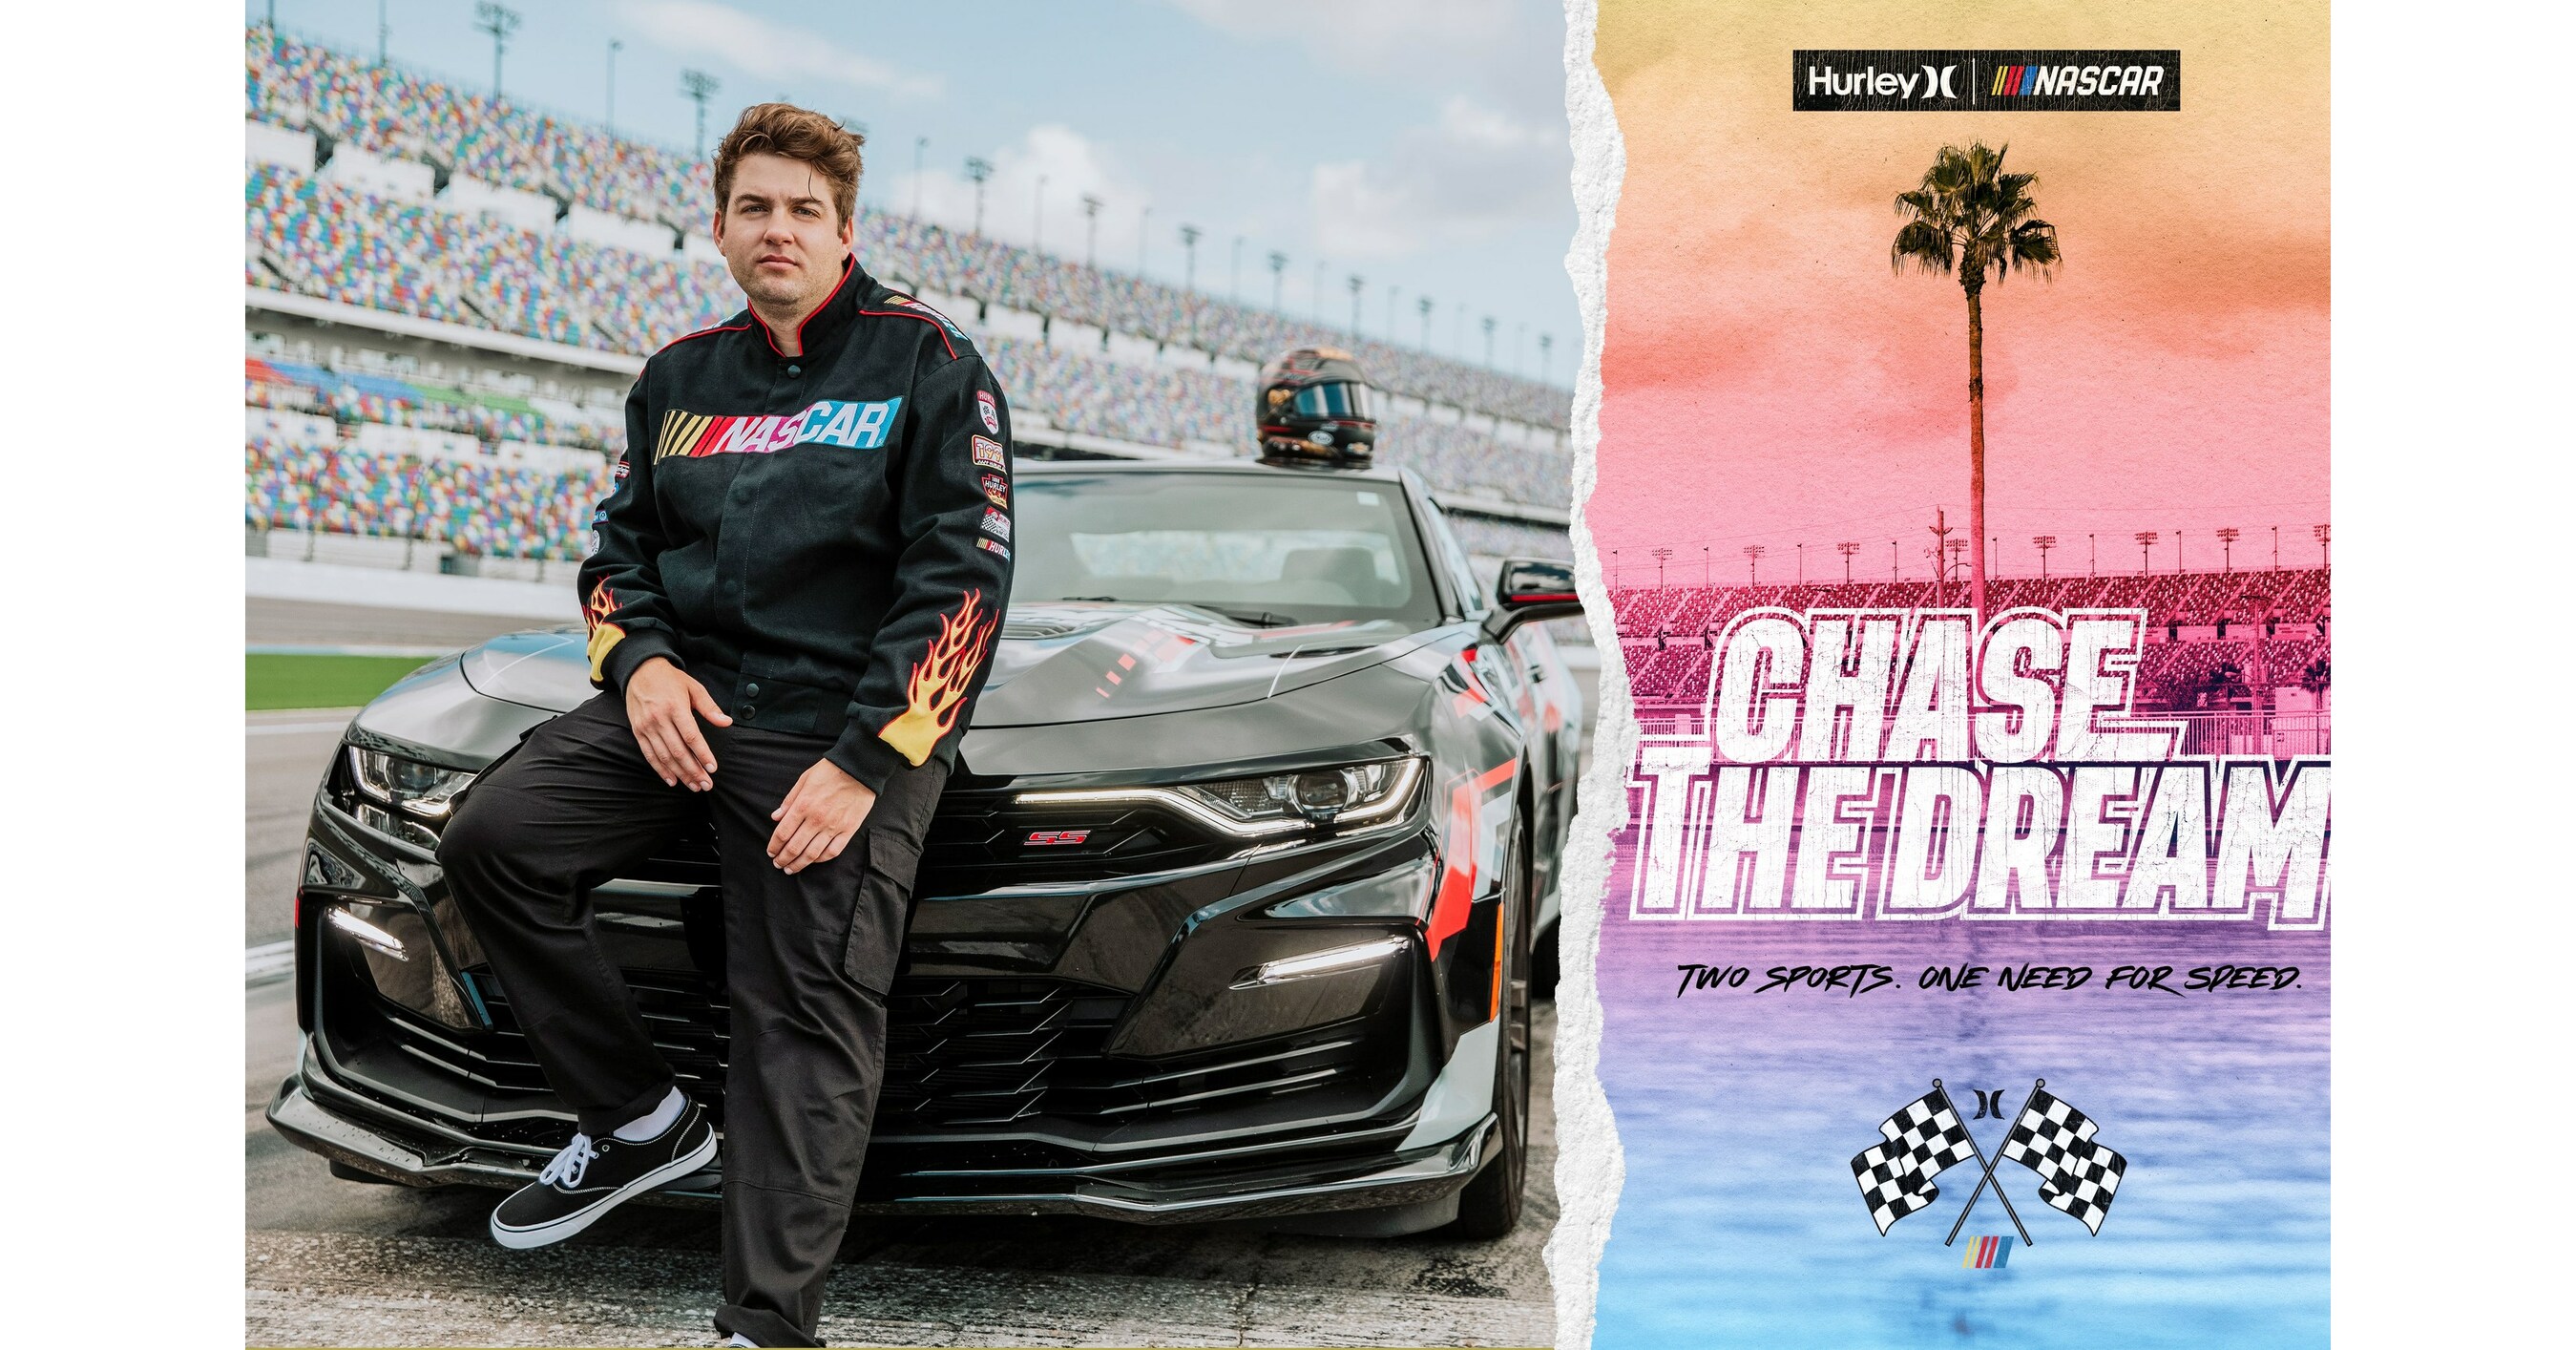 THE NASCAR X HURLEY COLLECTION